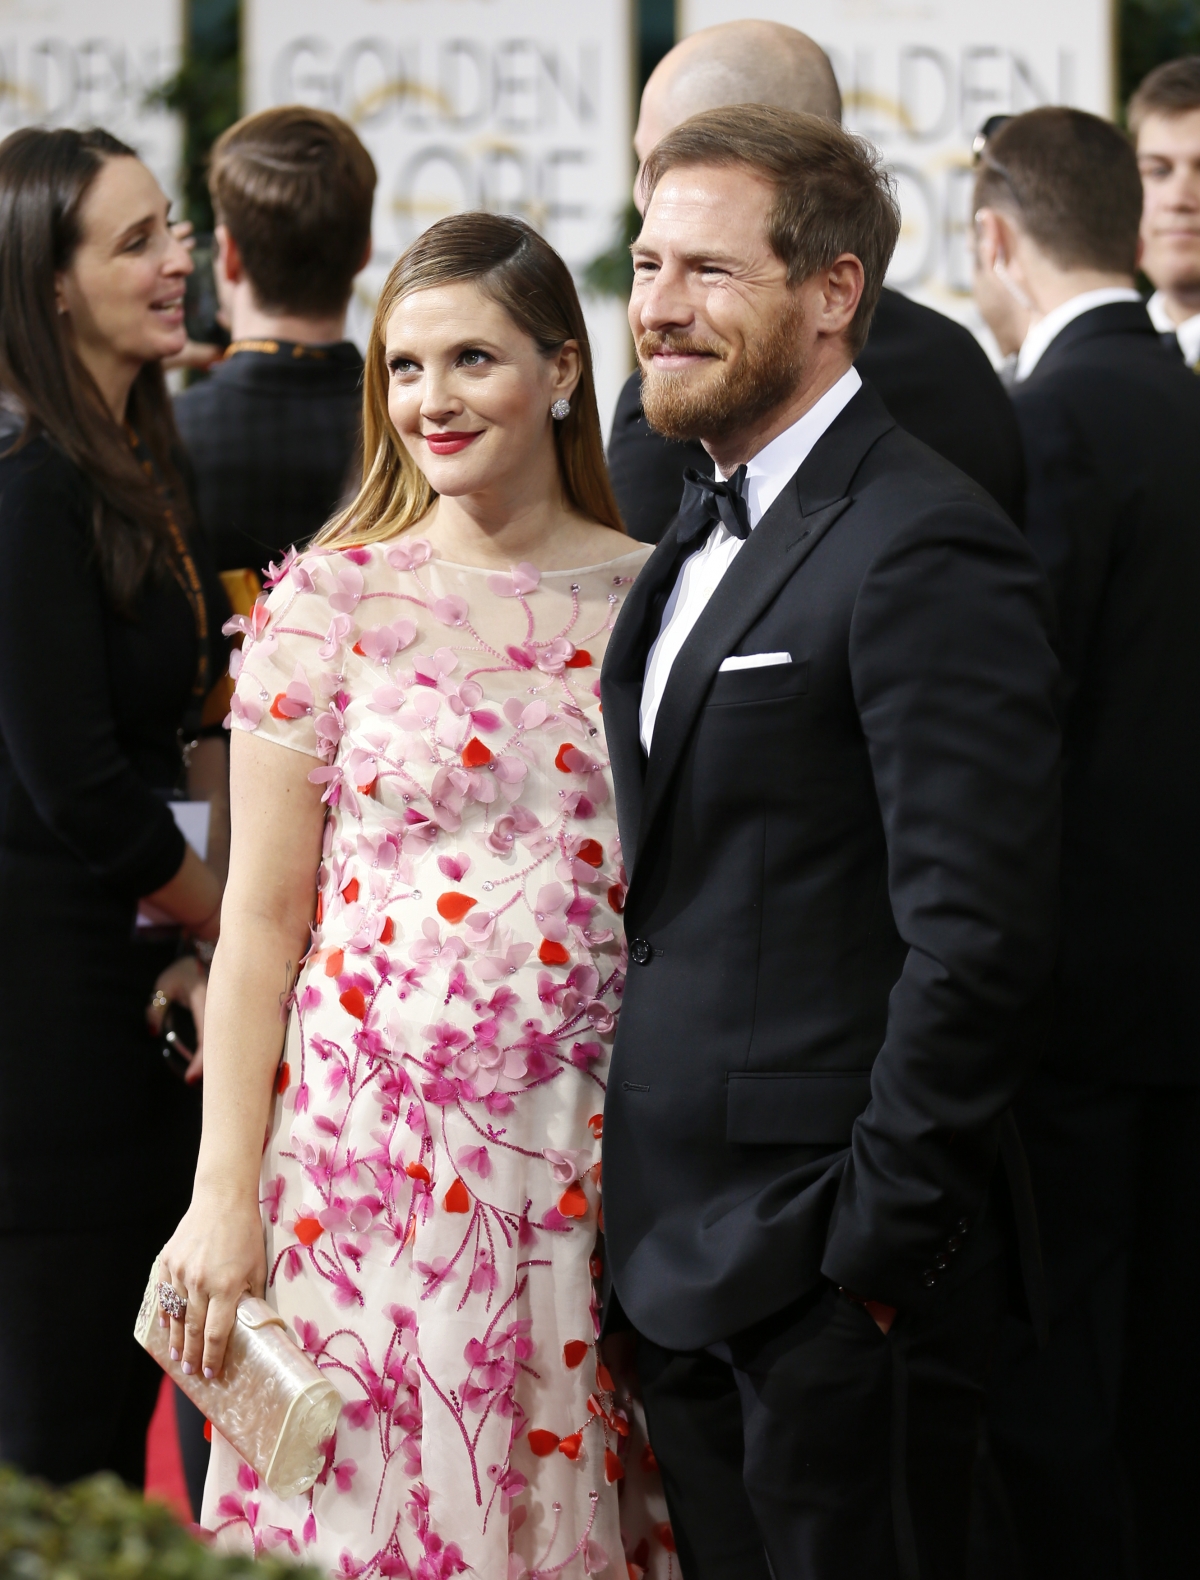 Actress Drew Barrymore and husband, Will Kopelman, arrive at the 71st annual Golden Globe Awards in Beverly Hills, California January 12, 2014.